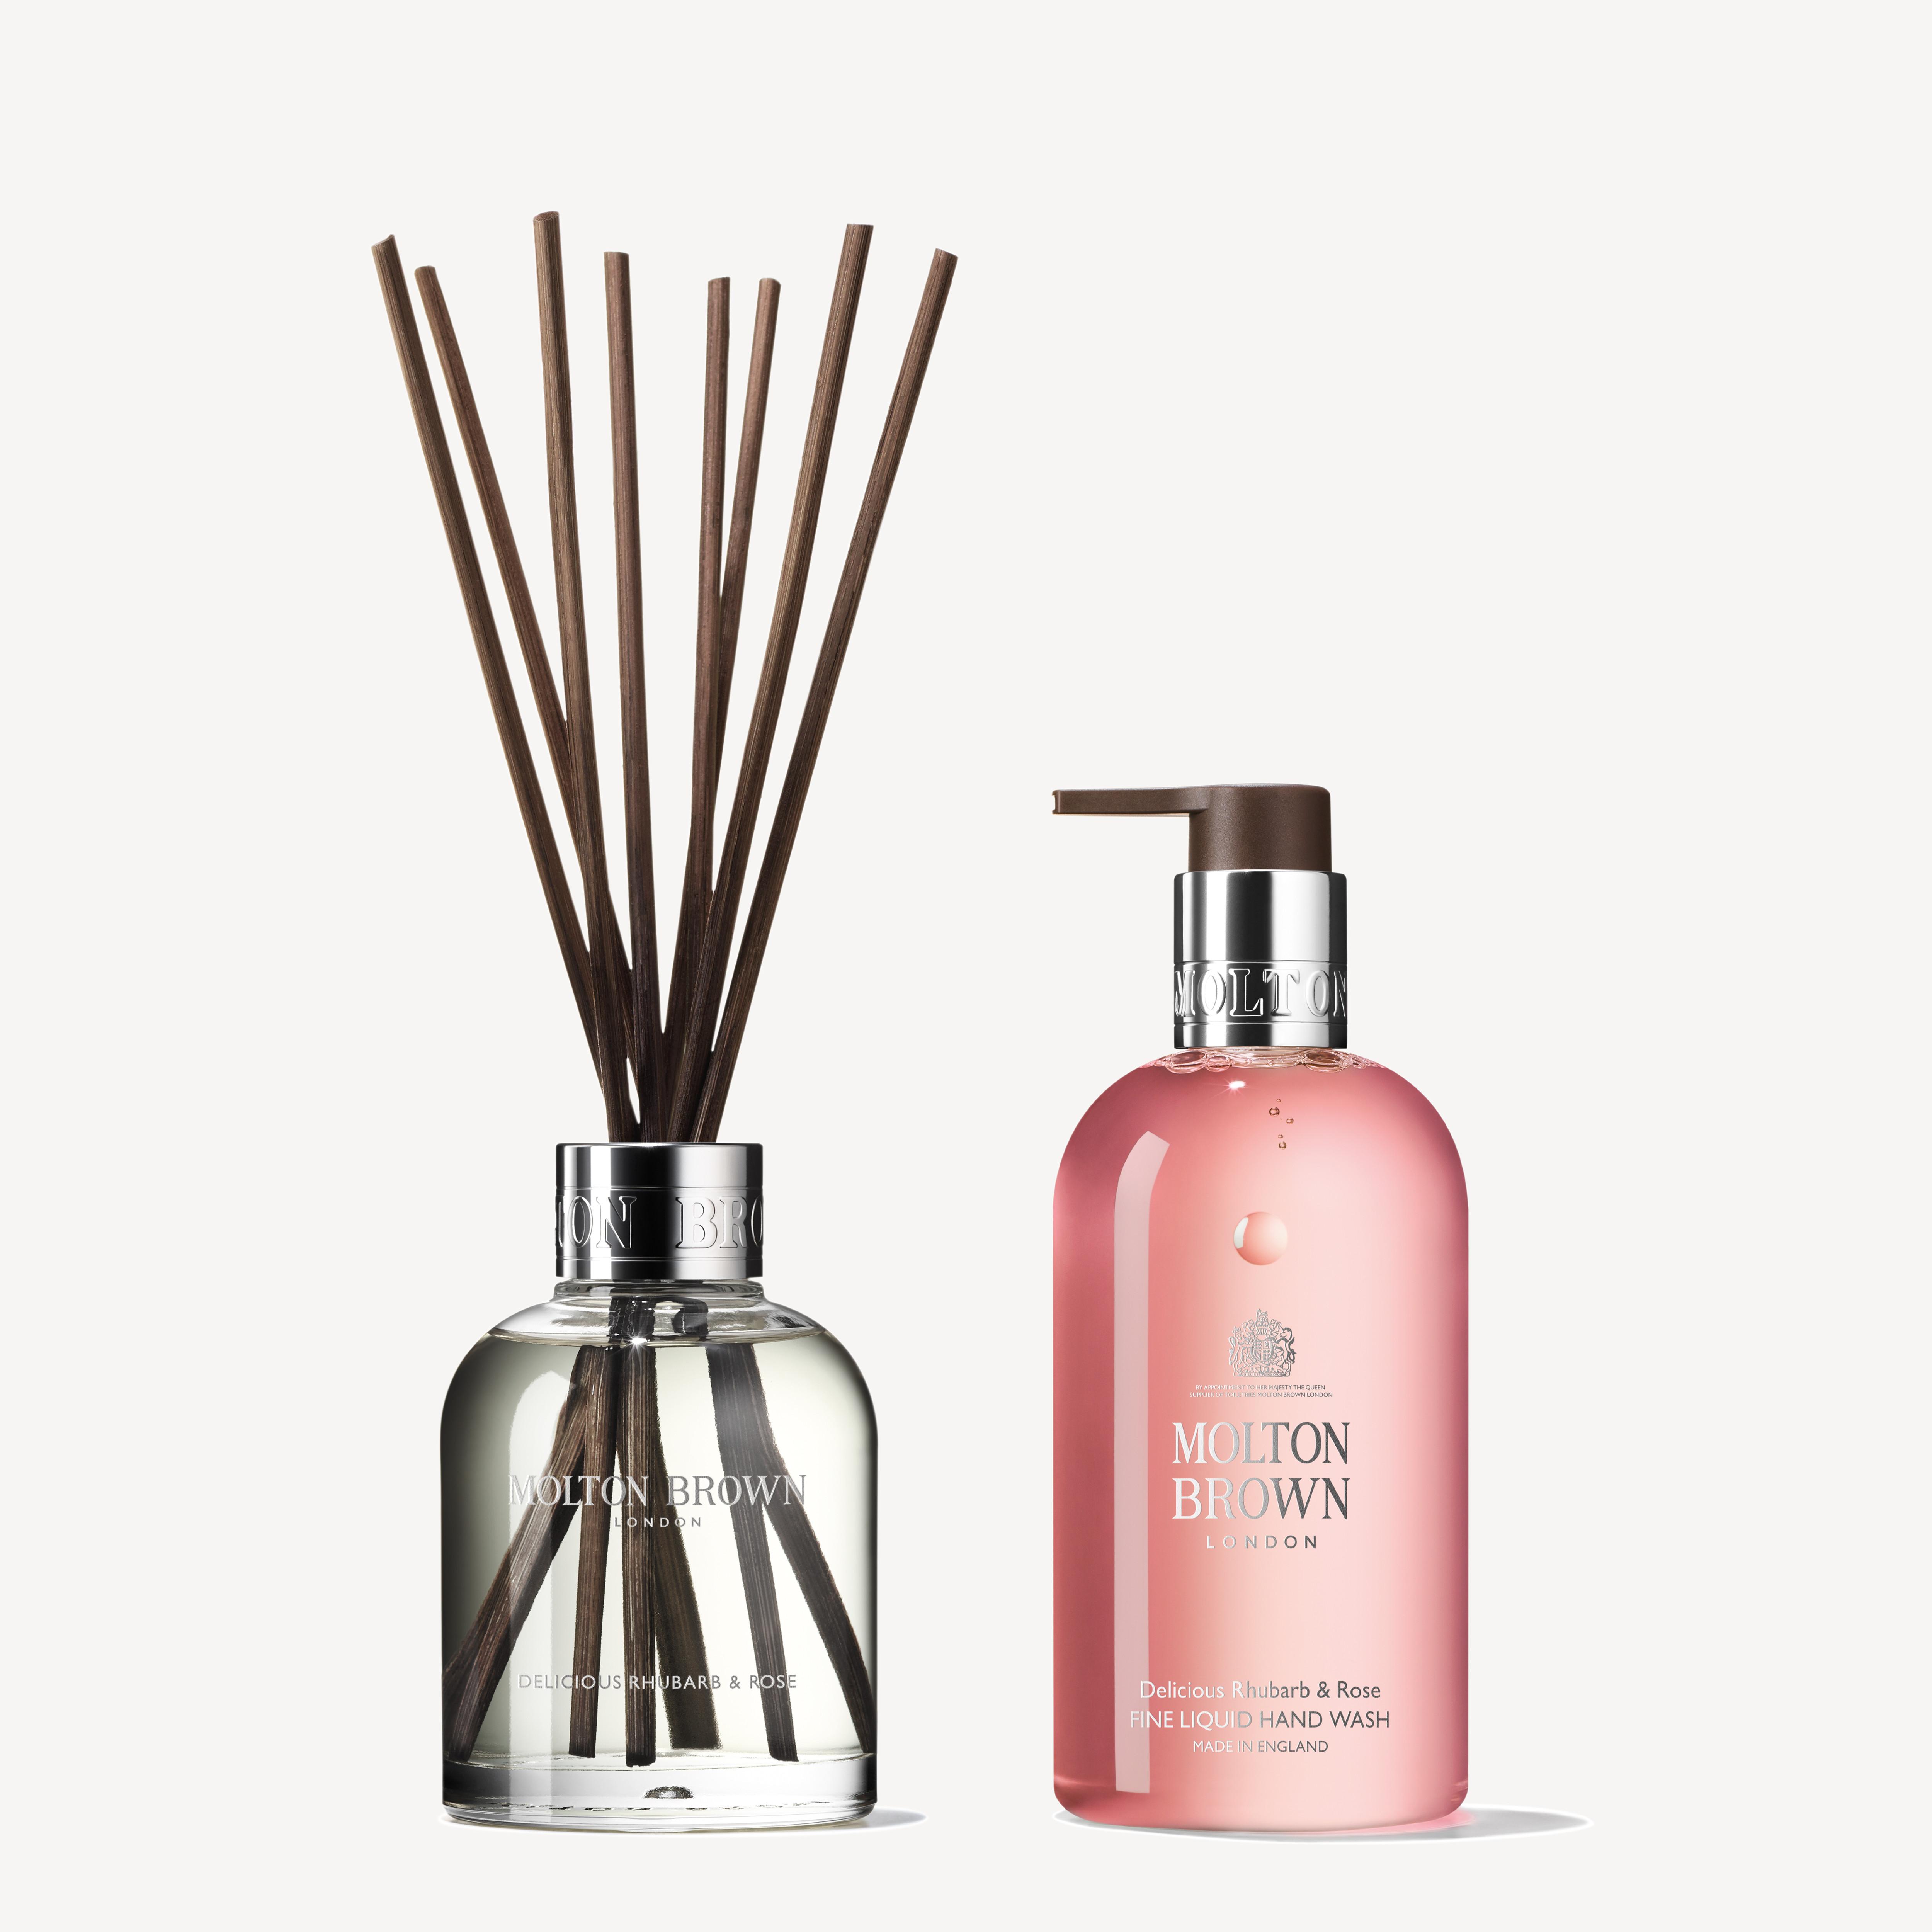 Molton Brown Delicious Rhubarb & Rose Aroma Reeds & Fine Liquid Hand Wash Gift Set